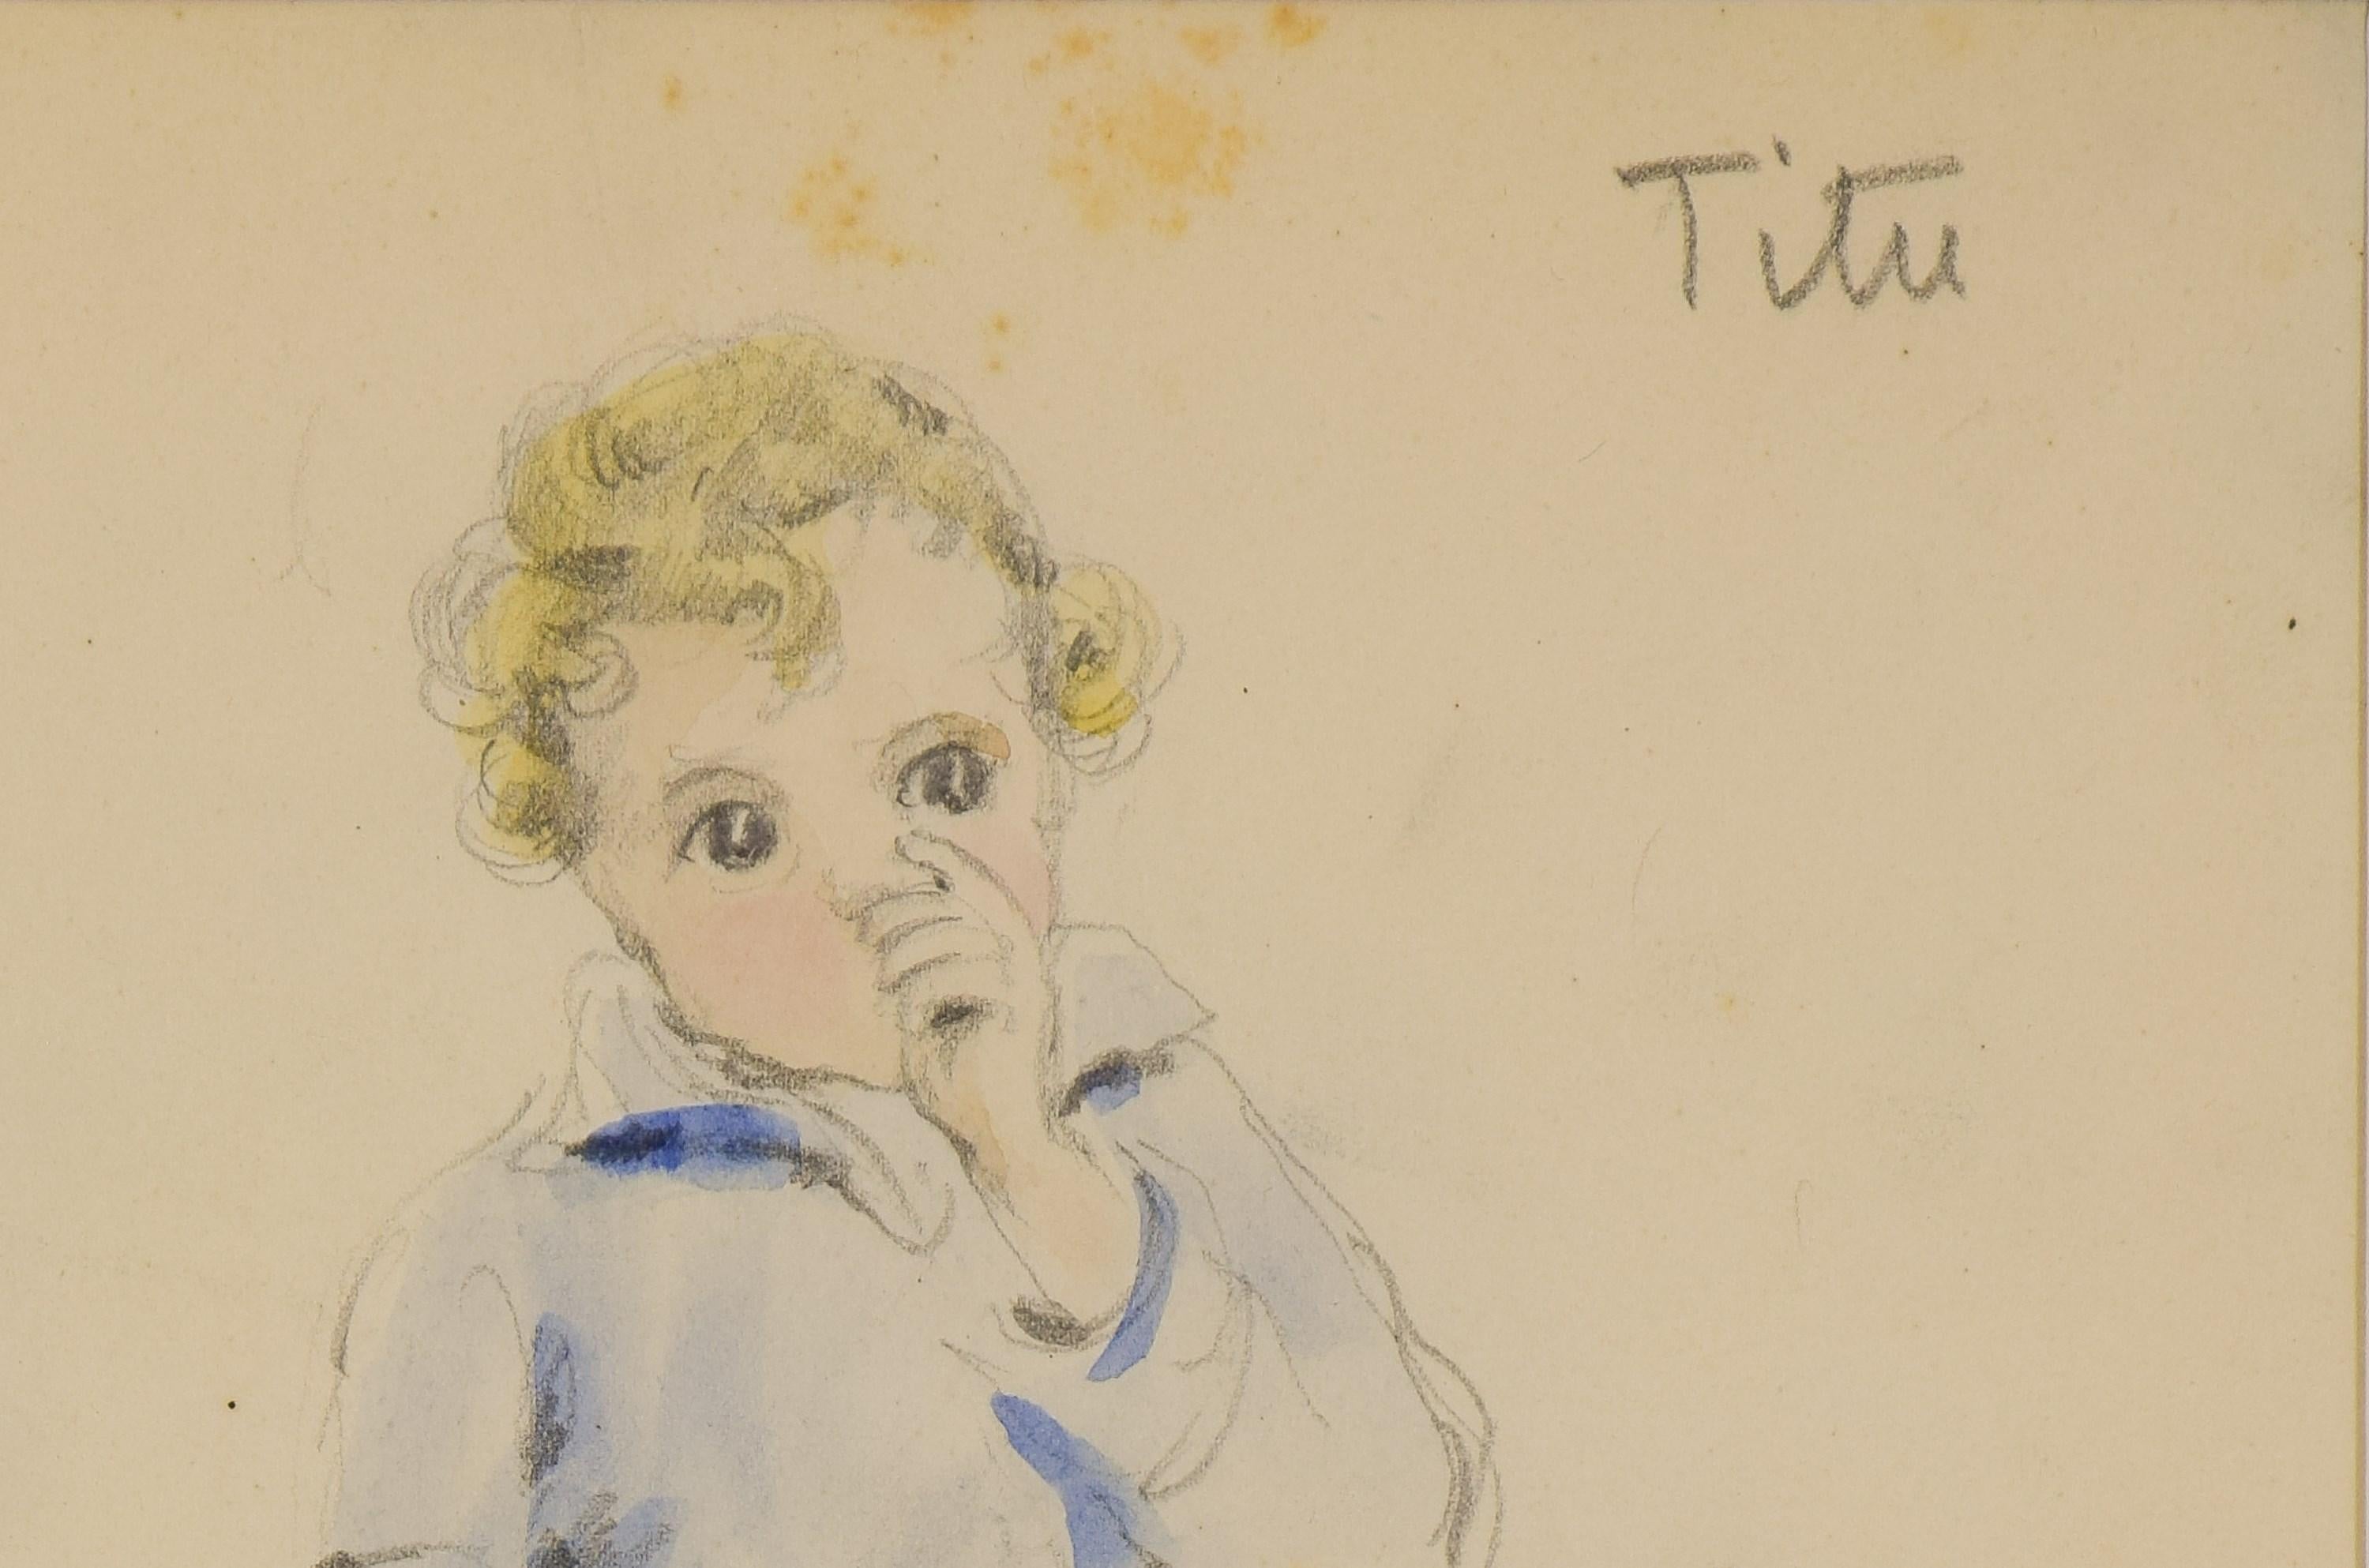 Études sur Titu by Paulémile Pissarro (1884 - 1972)
Watercolour and pencil on paper
33.5 x 23.6 cm (13 ¹/₄ x 9 ¹/₄ inches)
Signed lower middle Paulémile-Pissarro- and inscribed upper right Titu
Executed circa 1937

Provenance
Estate of the